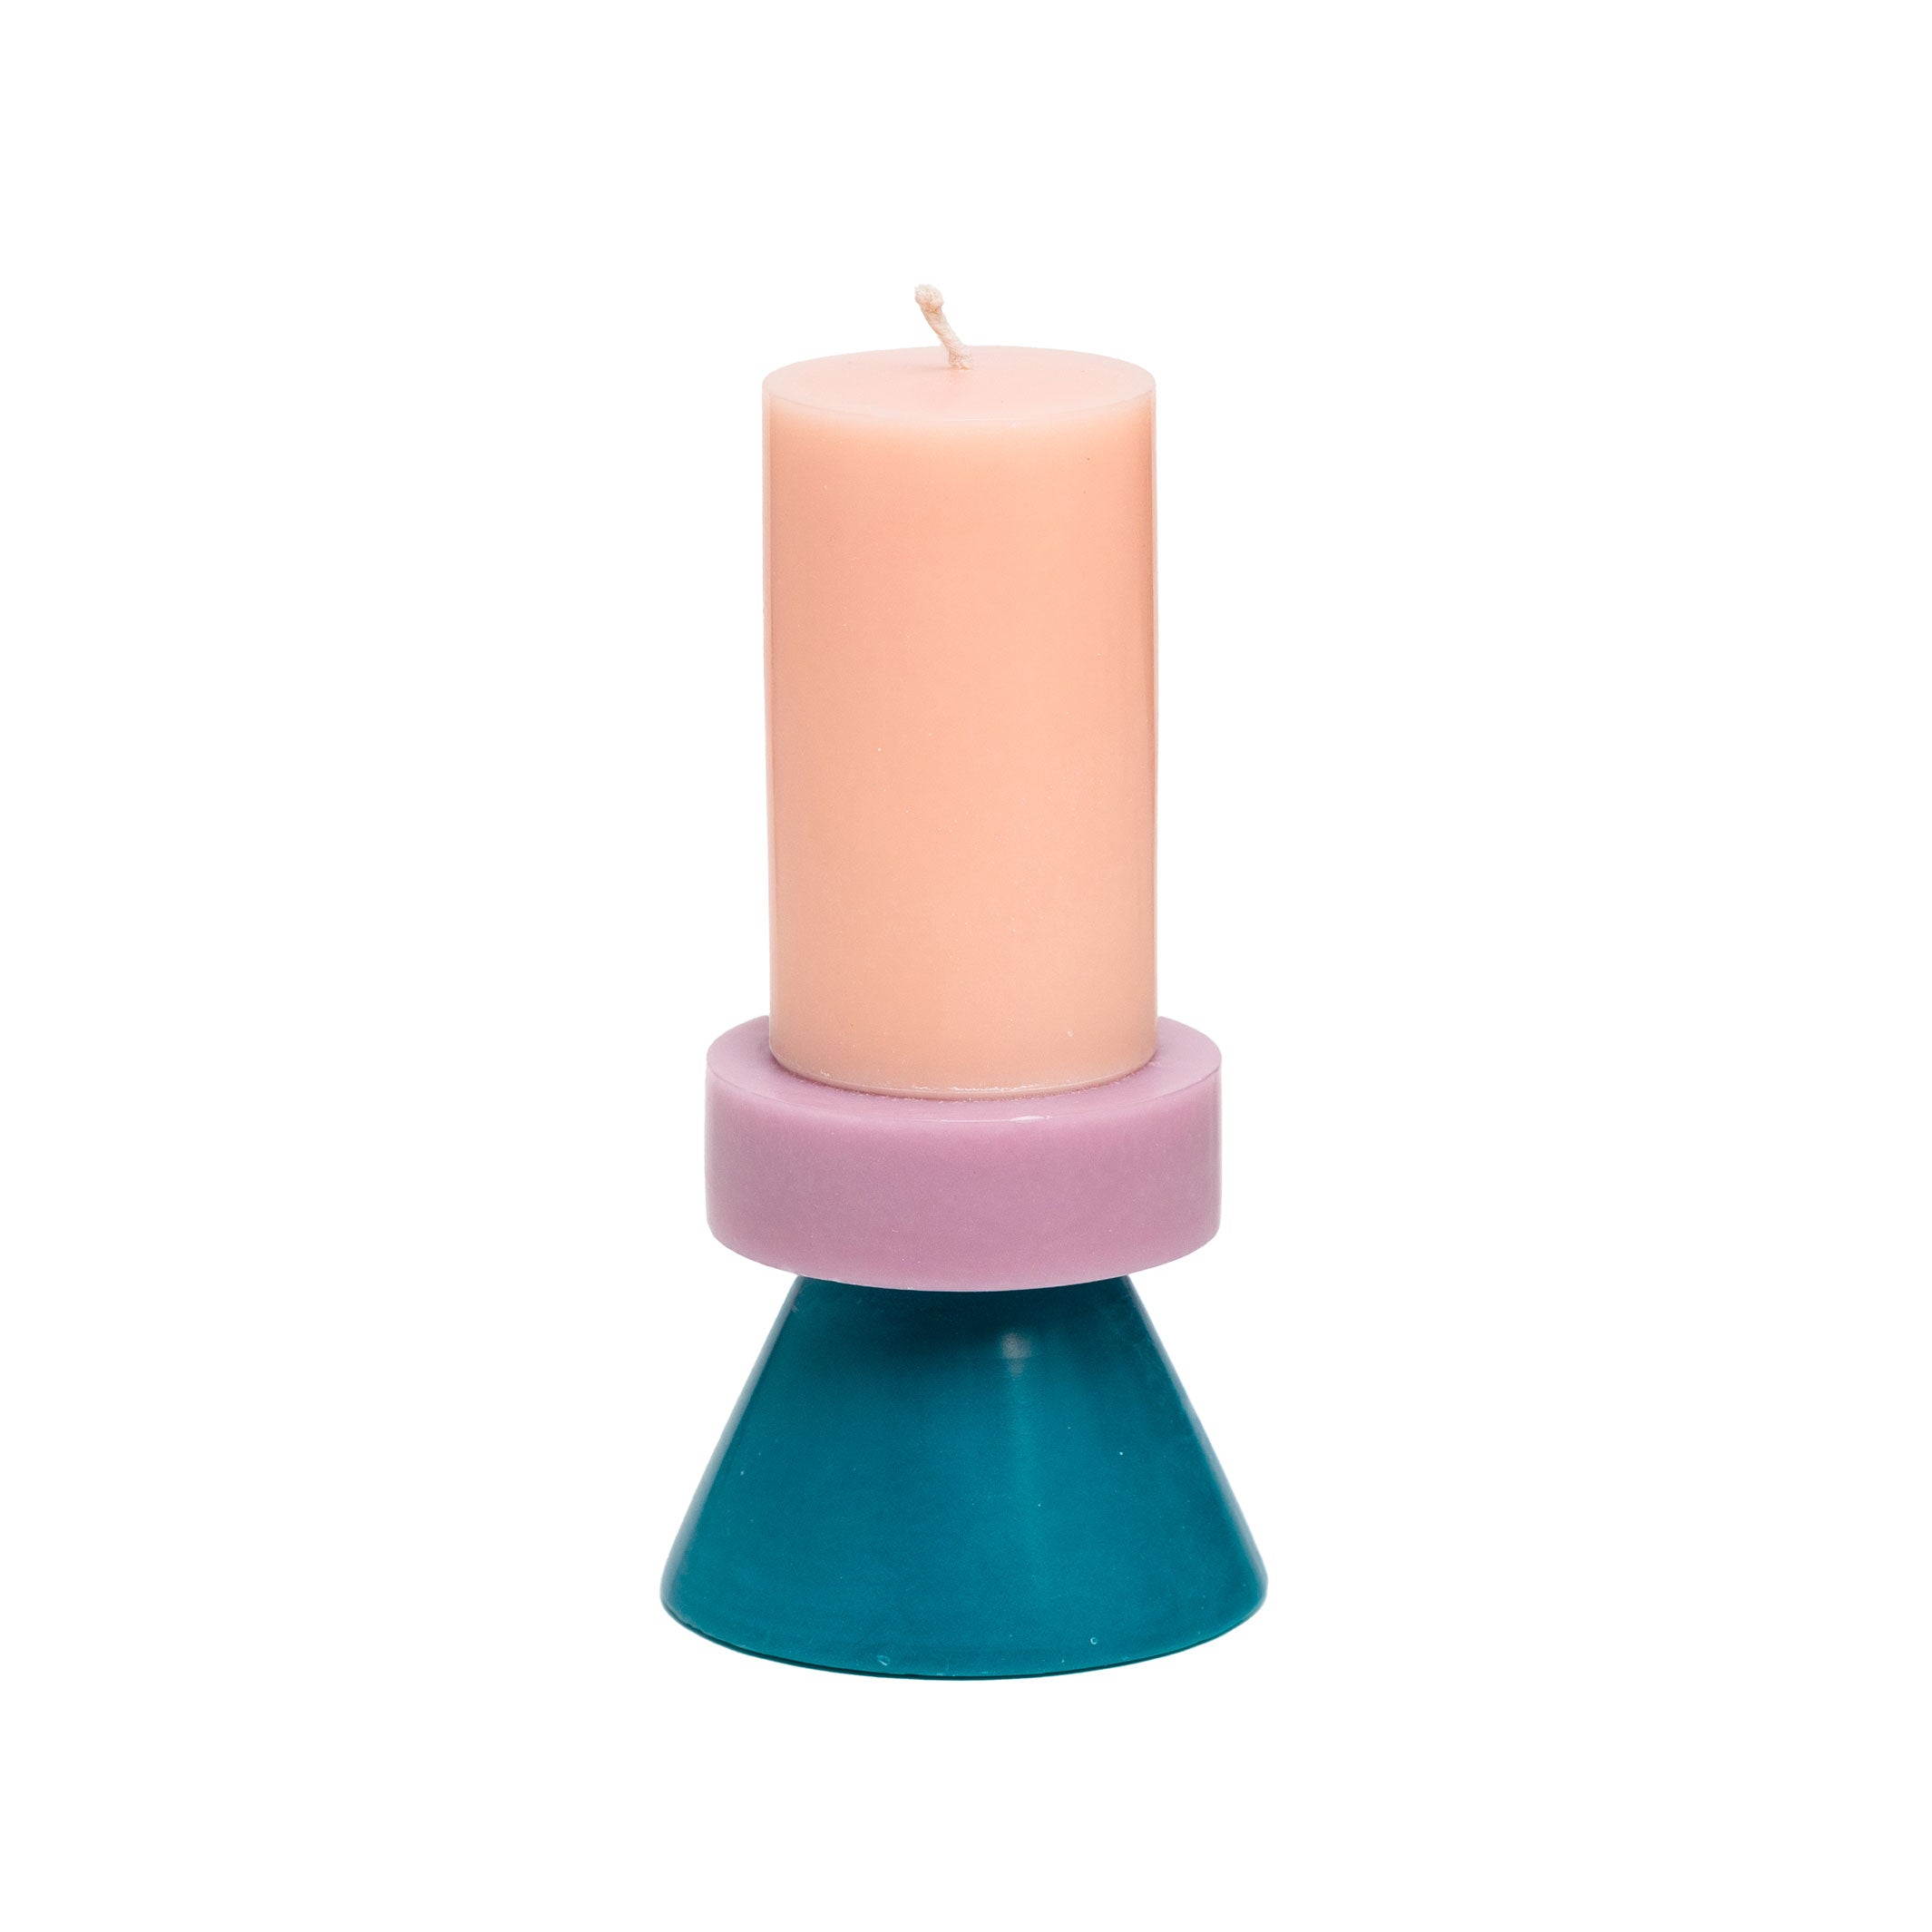 STACK CANDLE TALL | KERZE in Farben blush-pastelpurple-teal | 30 Std. Brenndauer | YOD AND CO